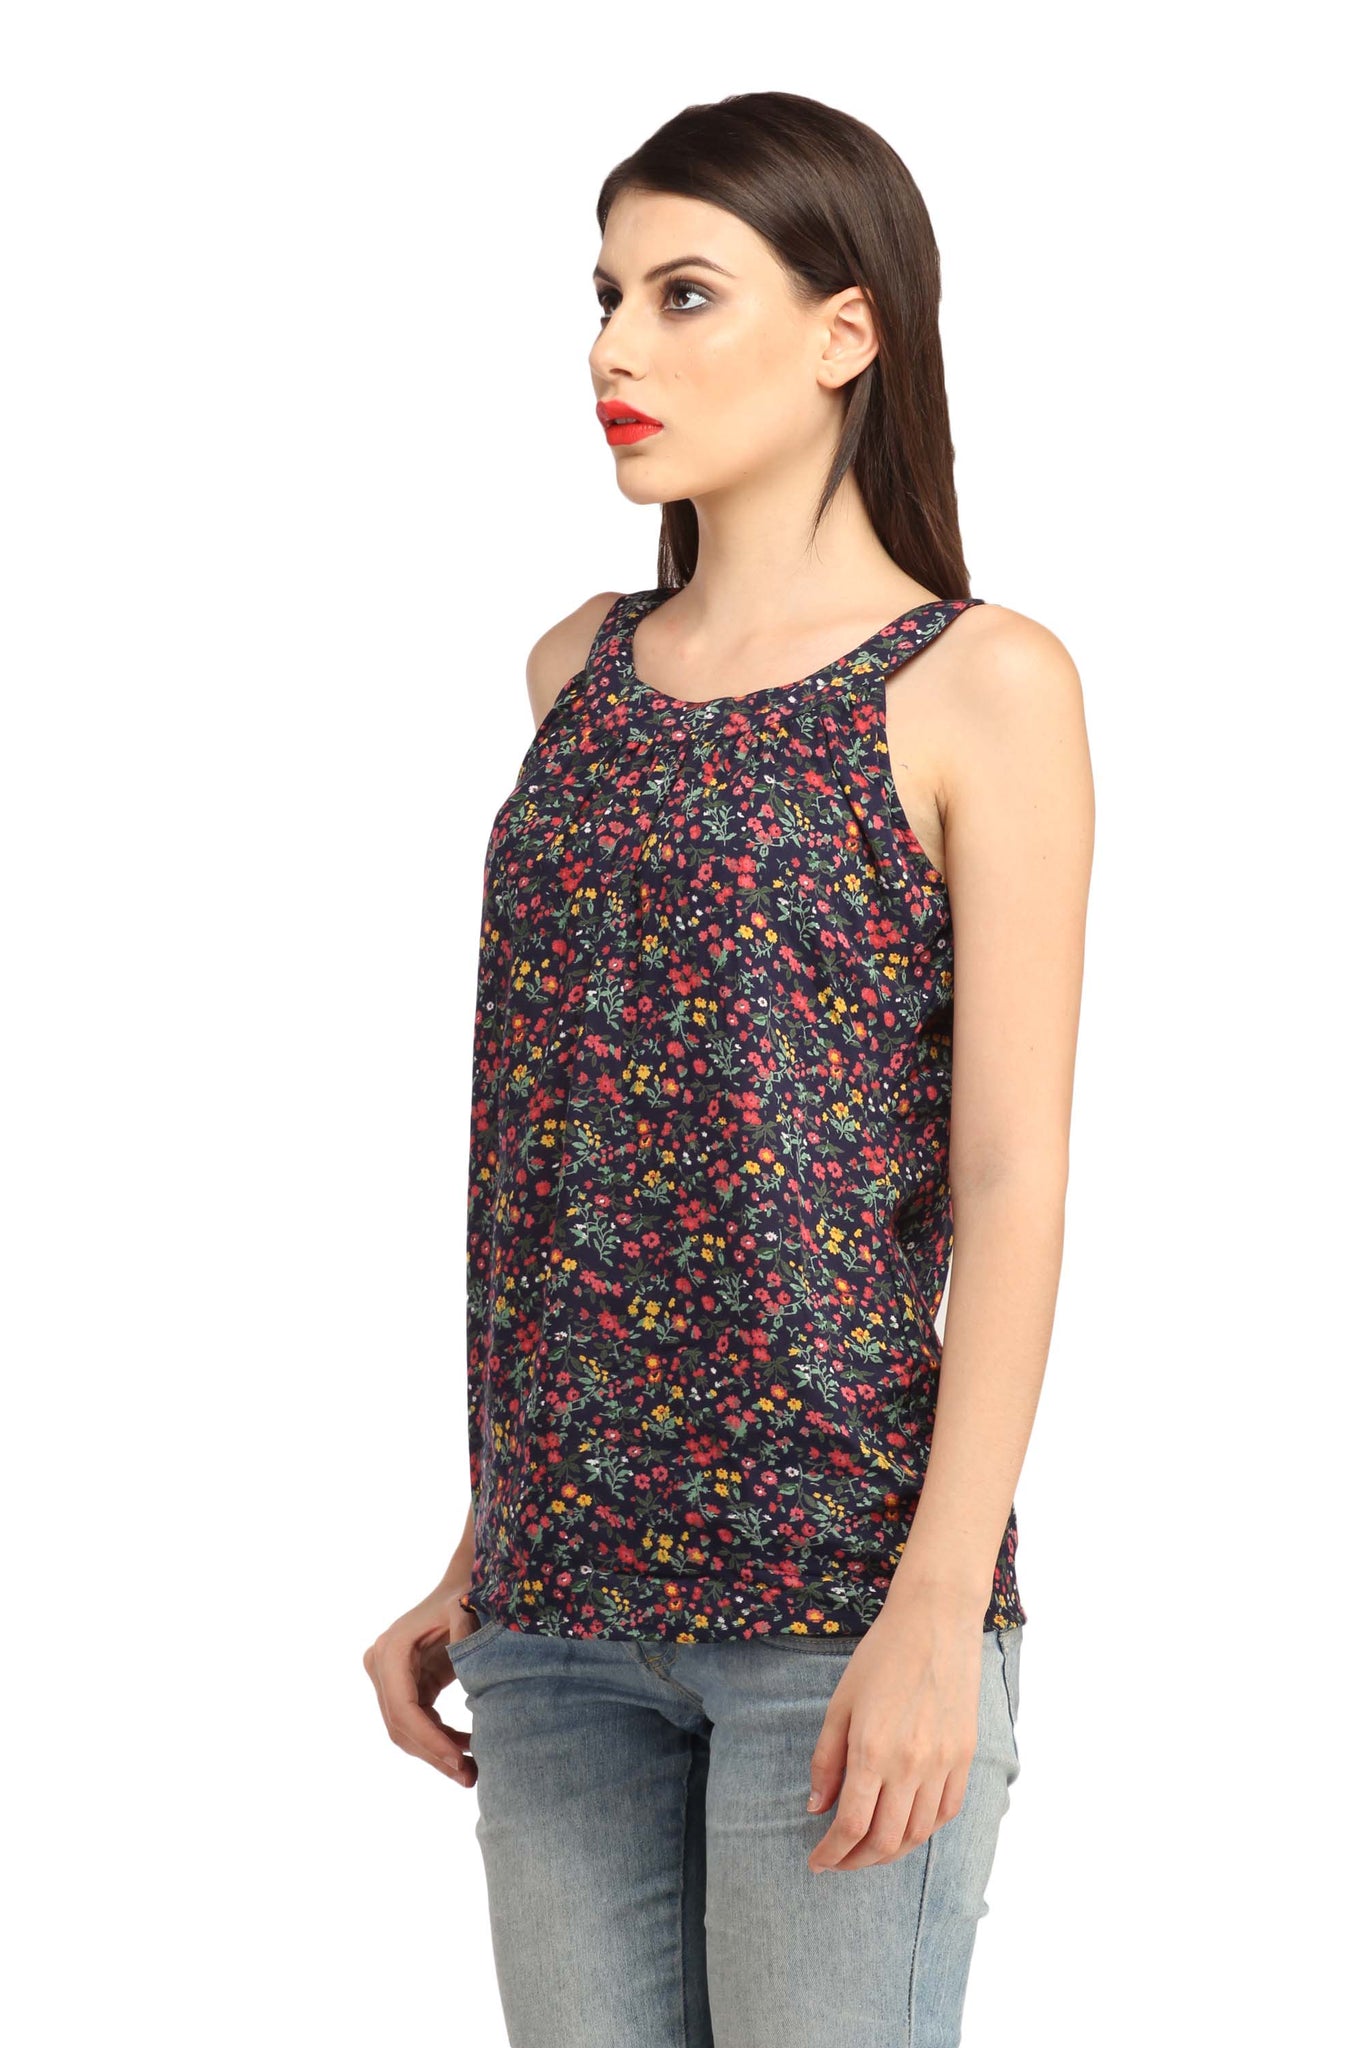 Cation Navy Blue Printed Top